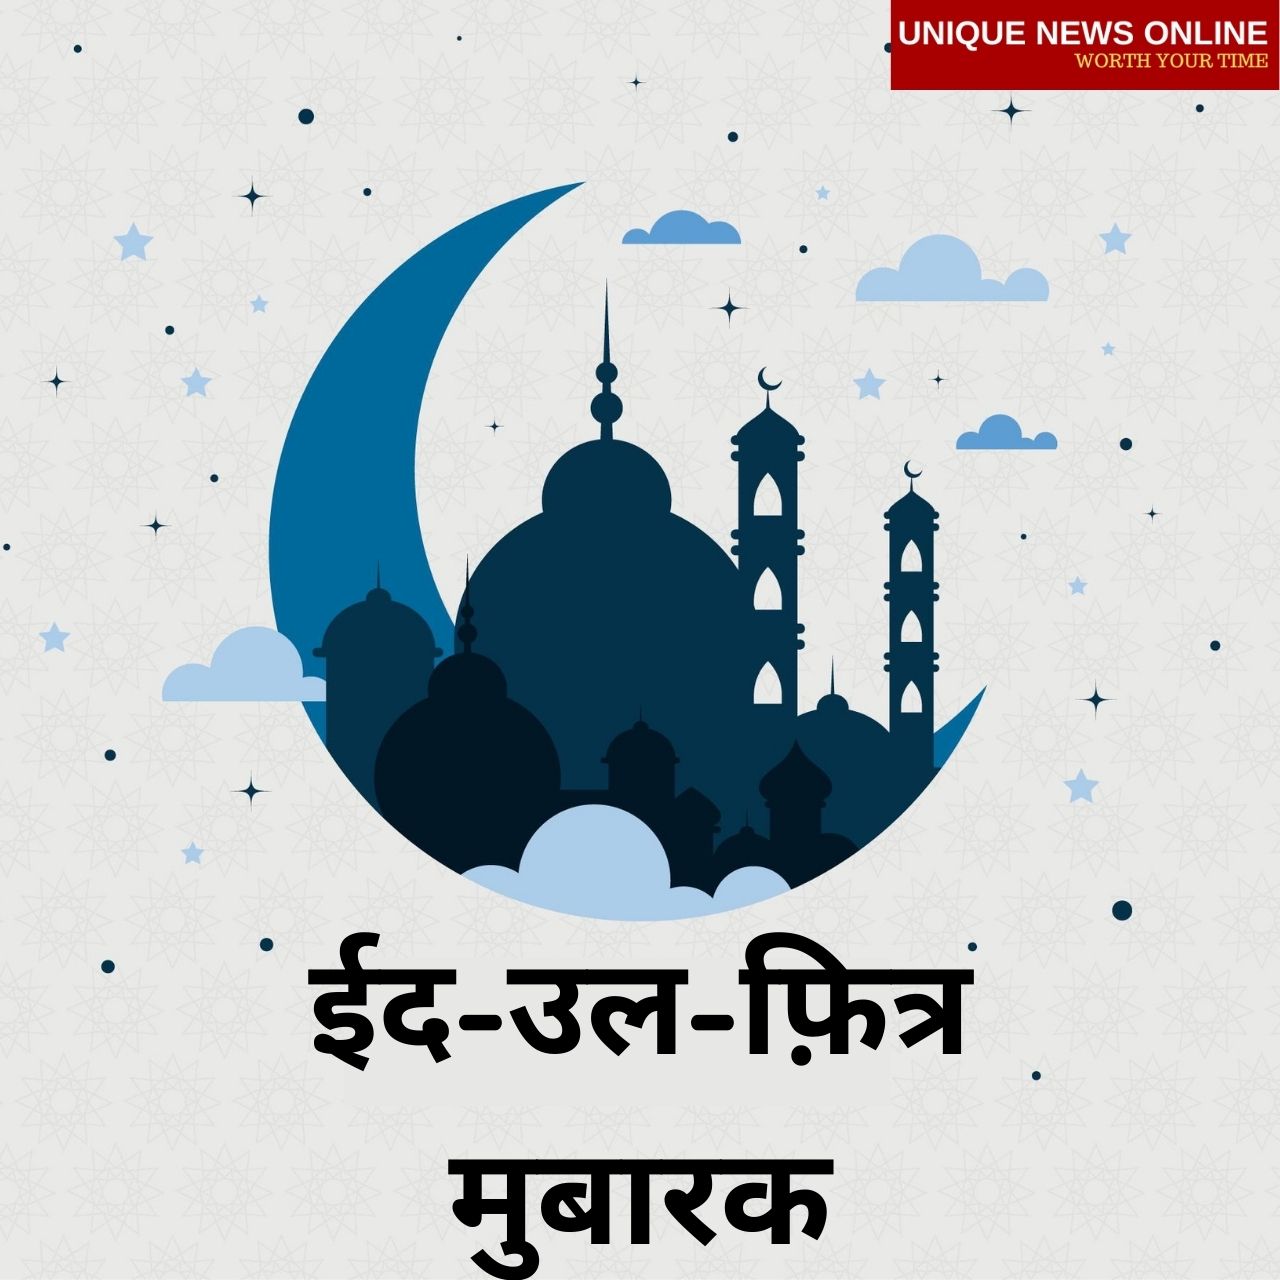 Eid-ul-Fitr Mubarak 2021 Wishes in Hindi, Images, Greetings, Messages, and Quotes to share on this Eid al-Fitr